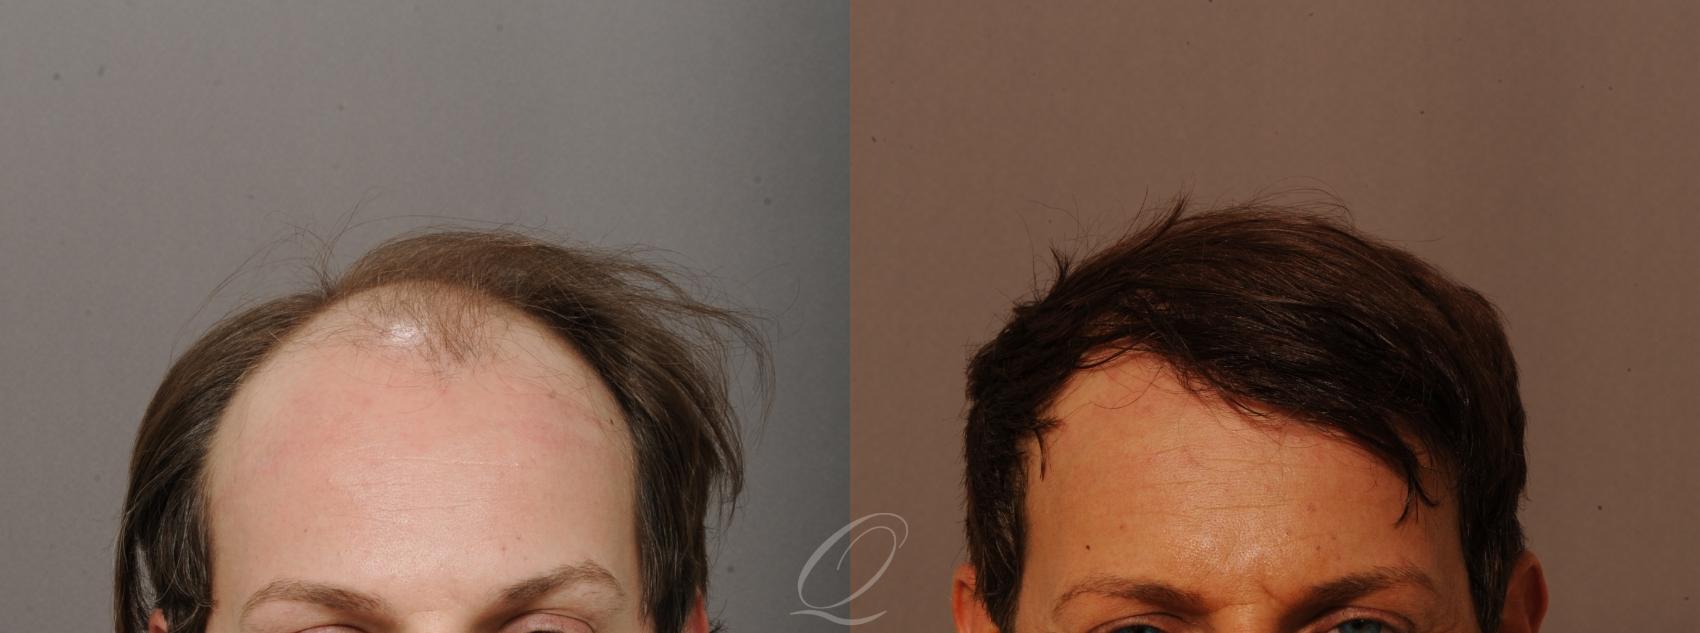 FUT Case 1001518 Before & After Front | Rochester, Buffalo, & Syracuse, NY | Quatela Center for Hair Restoration